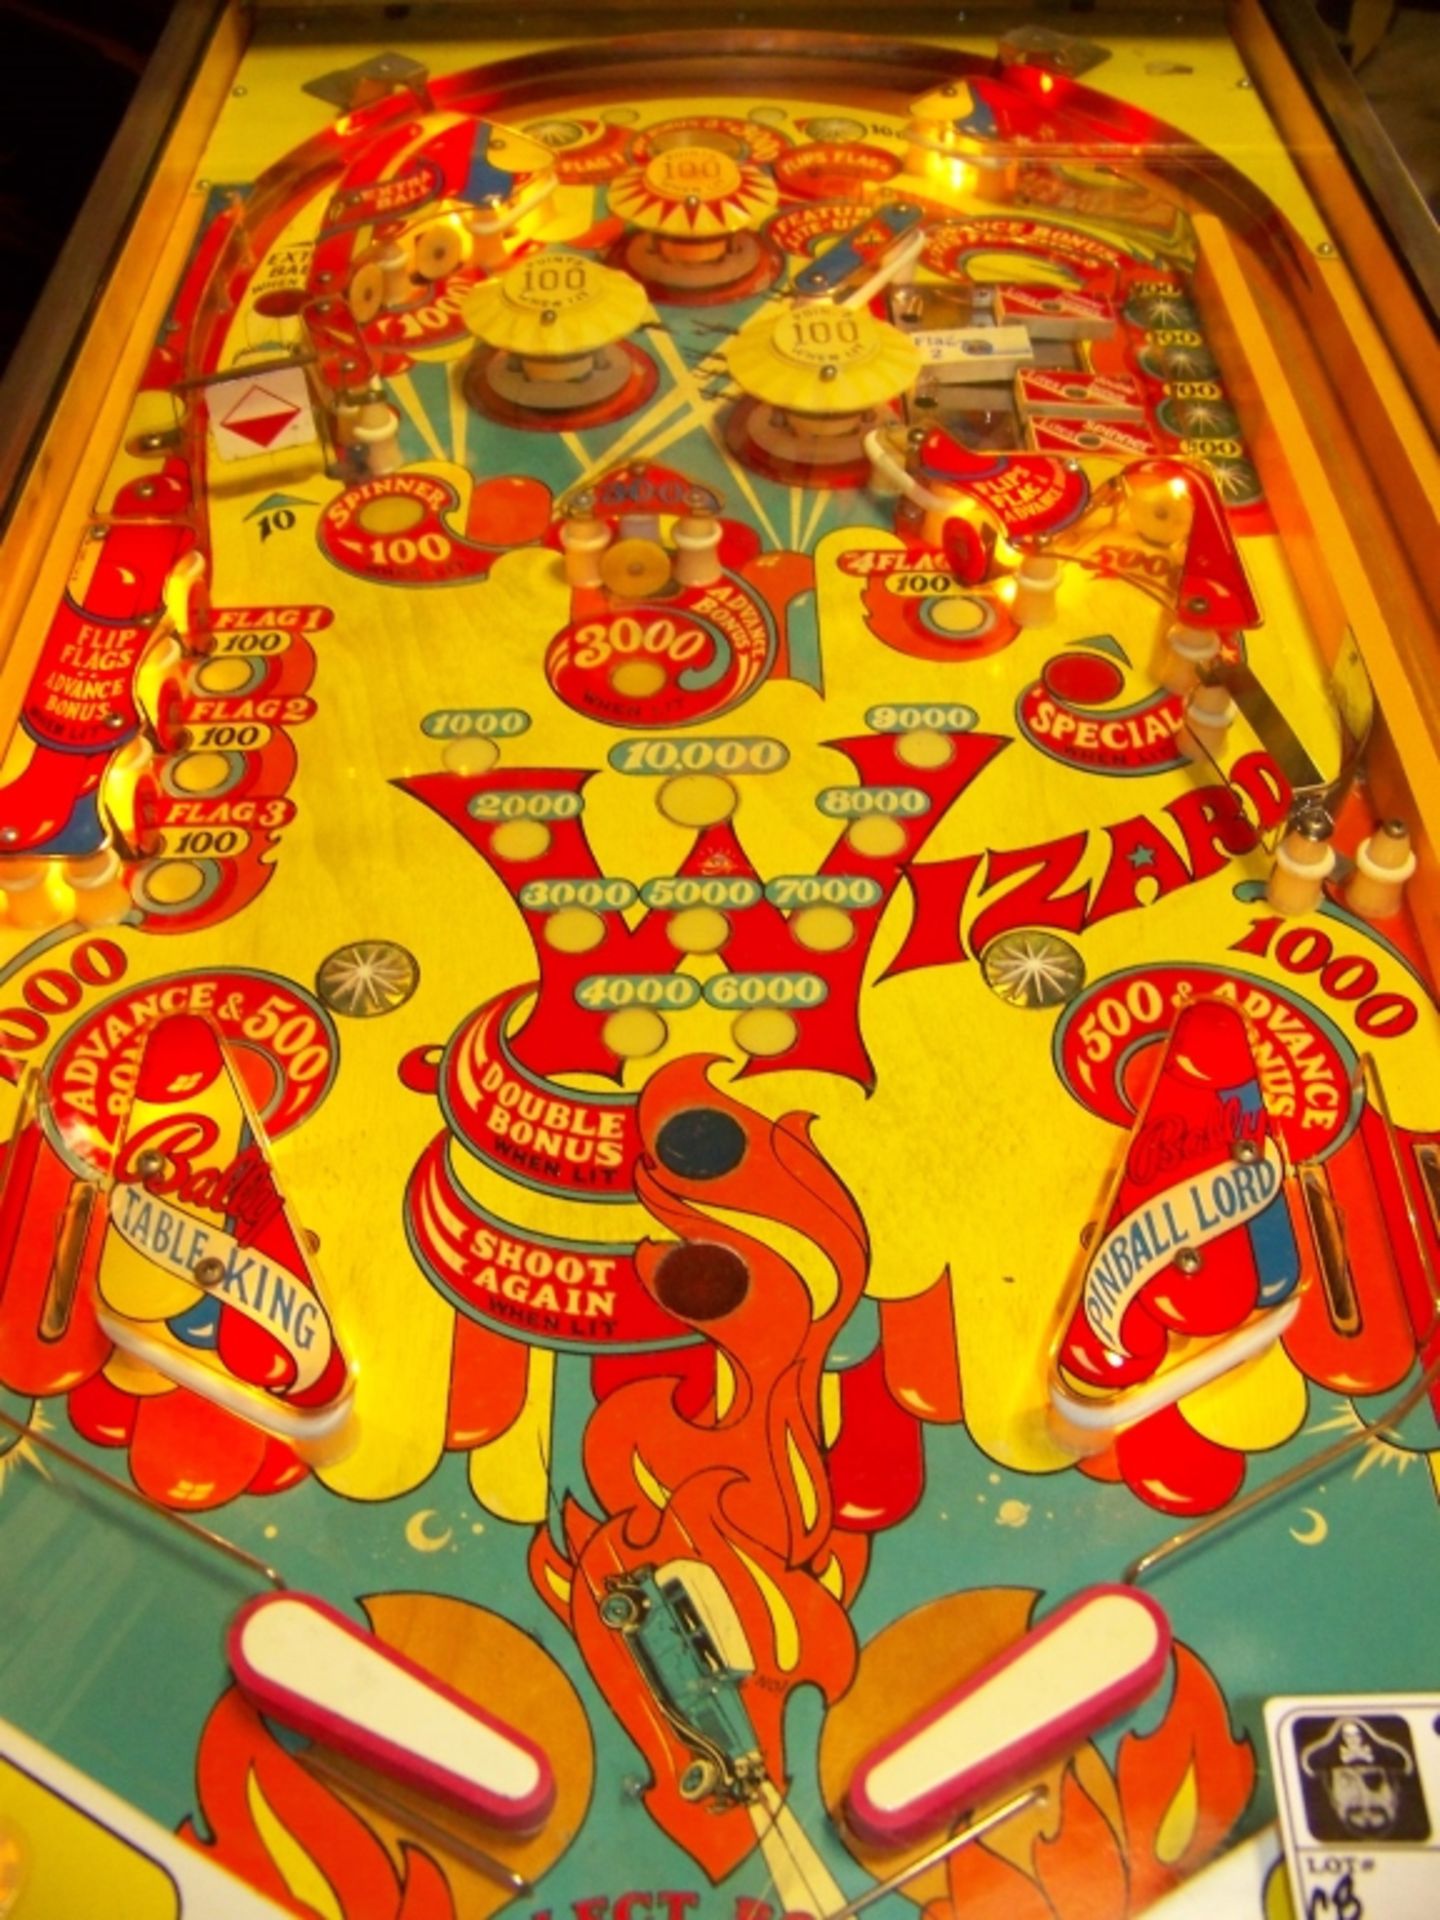 WIZARD! PINBALL MACHINE BALLY E.M. 1975 Item is in used condition. Evidence of wear and commercial - Image 7 of 10